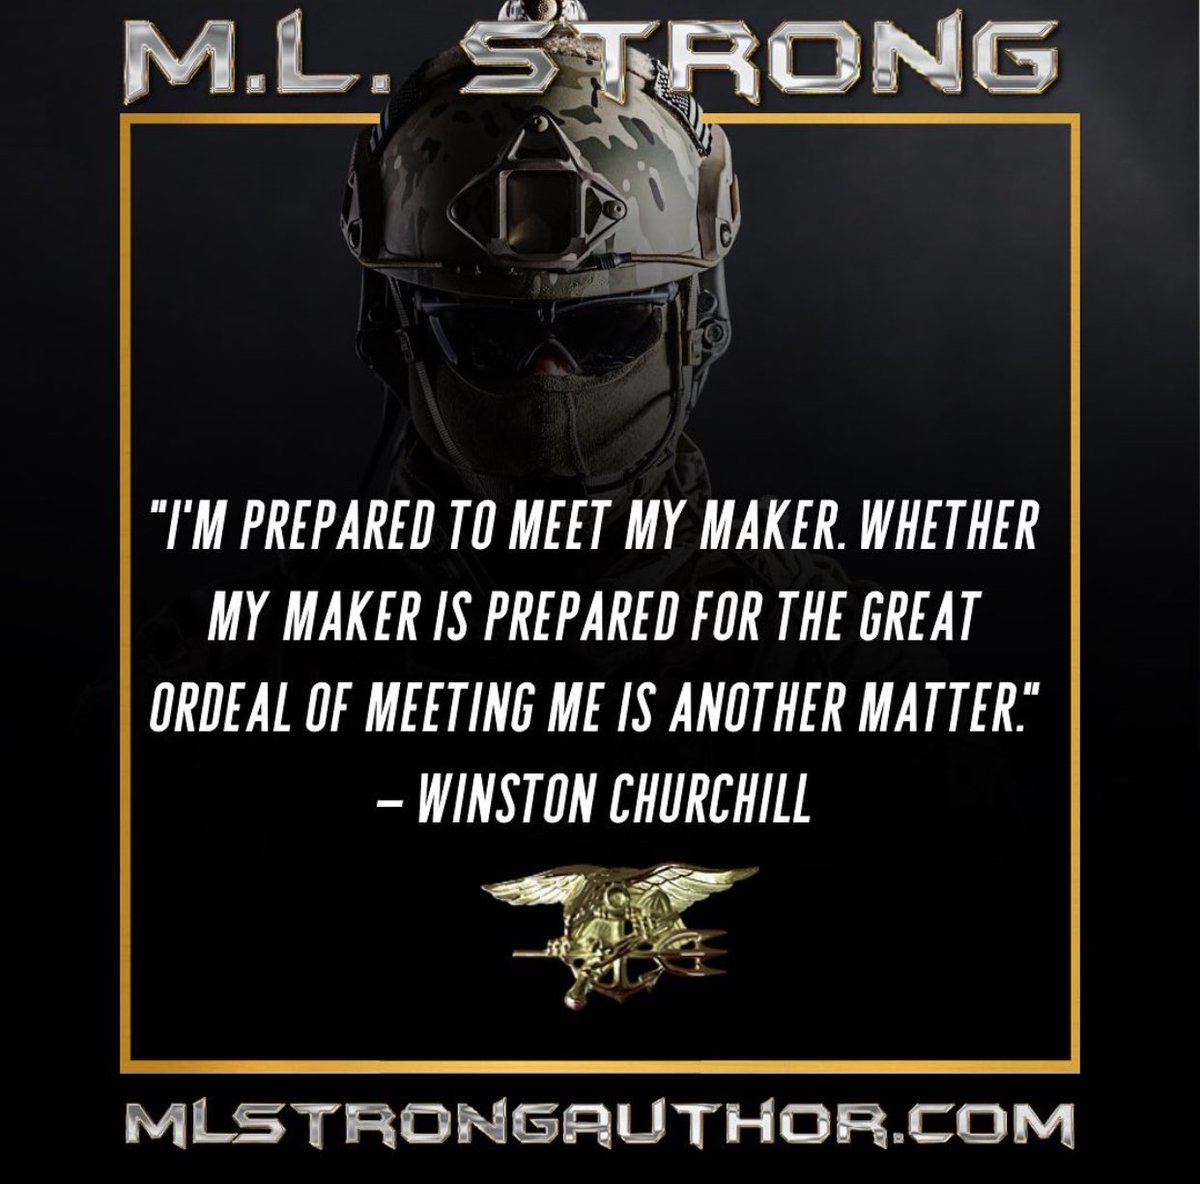 “I’m prepared to meet my Maker. Whether my Maker is prepared for the great ordeal of meeting me is another matter.”— WINSTON CHURCHILL

MLStrongAuthor.com
#lltb #navyseal #theteams #teamsandshit #UDT #sealteams #nsw #twoisone #onlyeasydaywasyesterday #longlivethebrotherhood